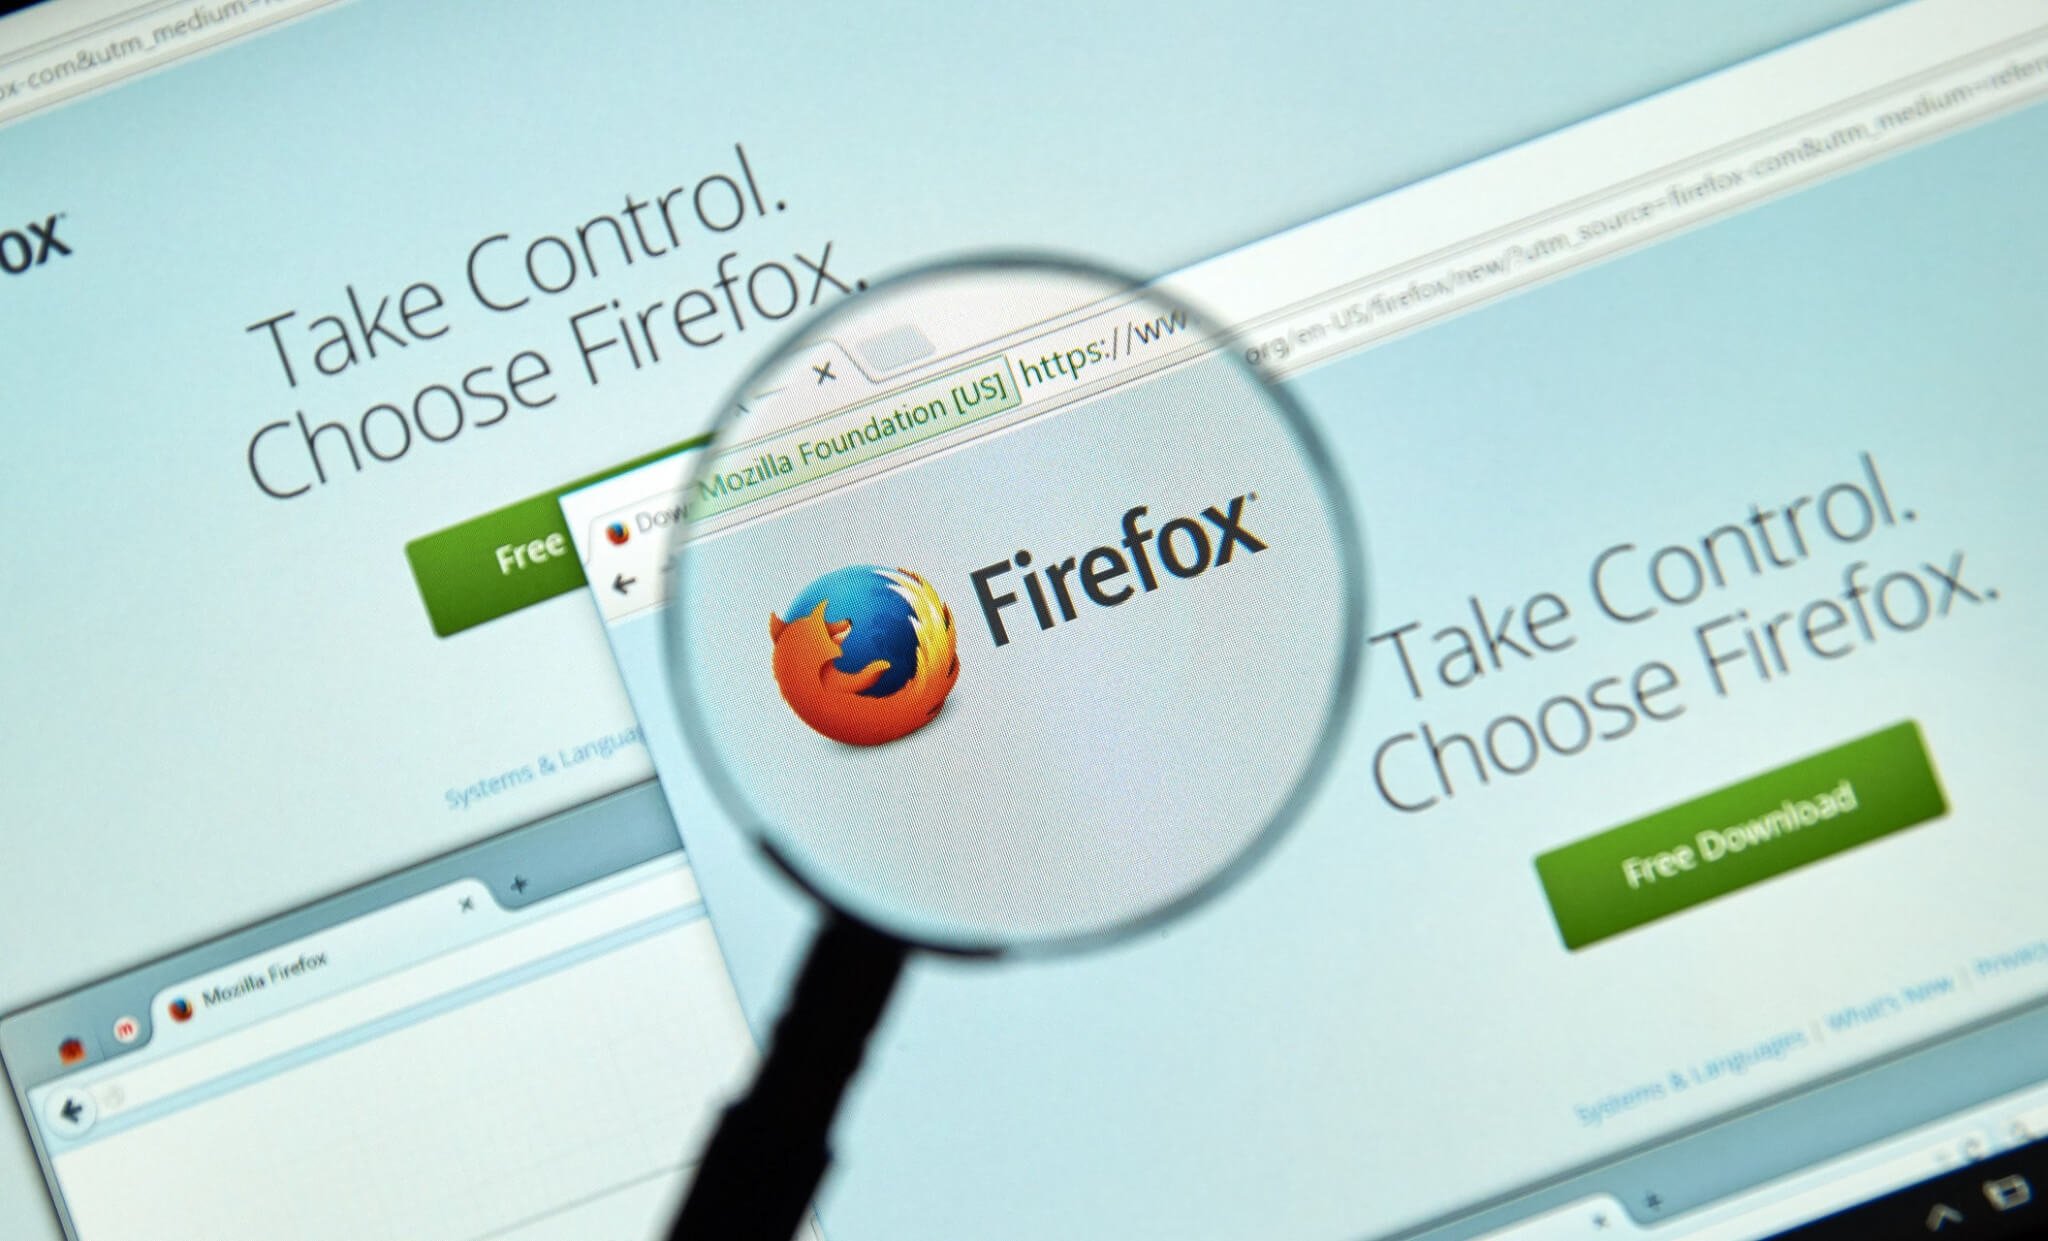 Firefox 78.0 helps you protect your privacy